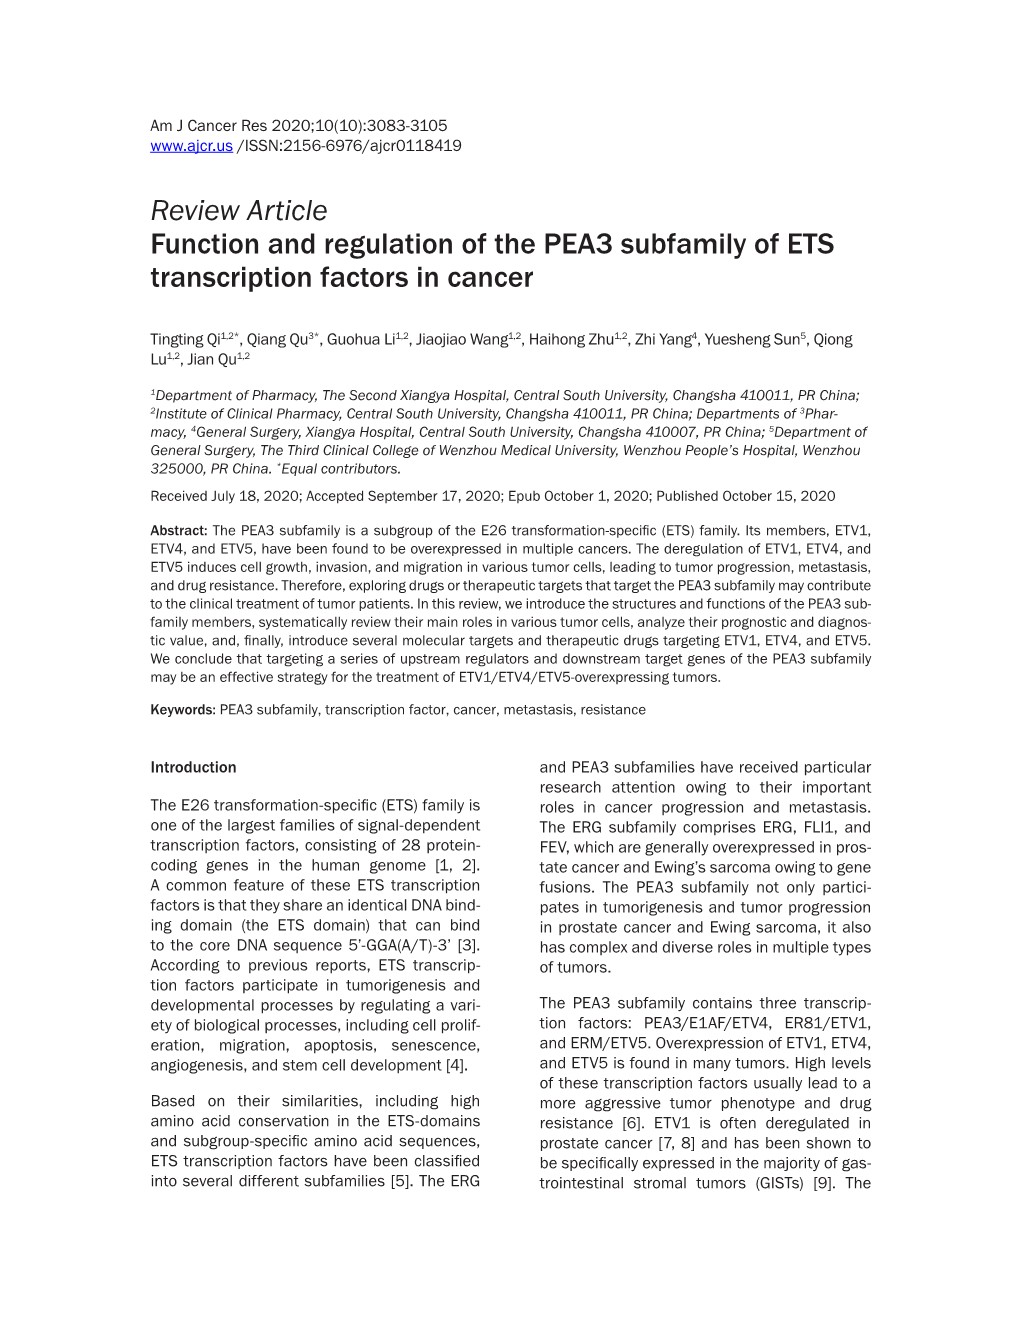 Review Article Function and Regulation of the PEA3 Subfamily of ETS Transcription Factors in Cancer